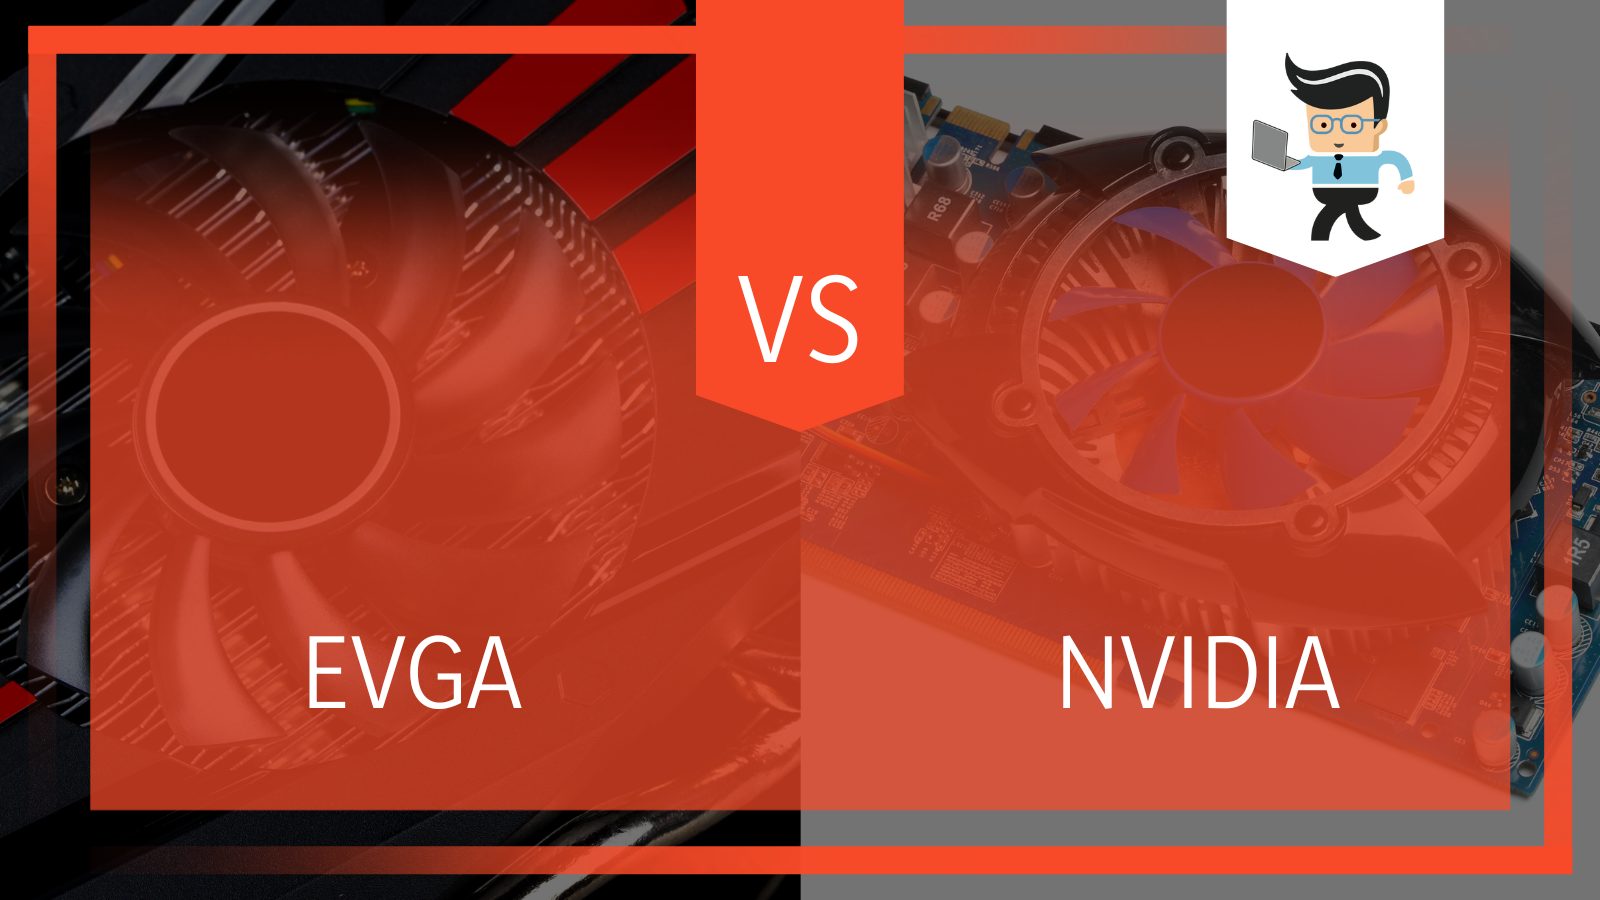 What are the Differences Between EVGA vs NVIDIA